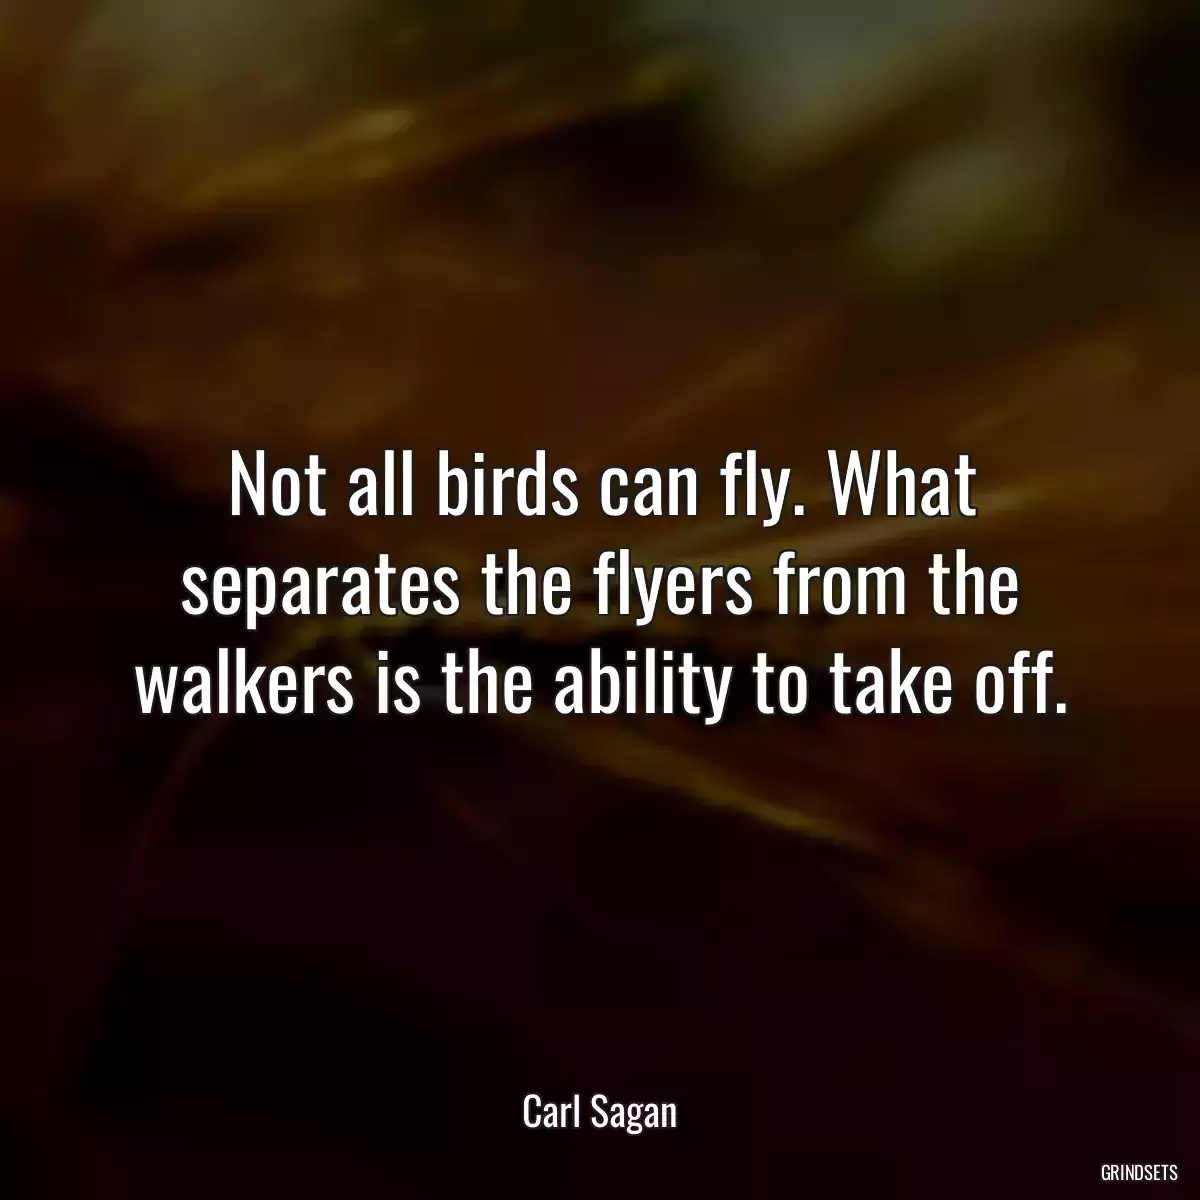 Not all birds can fly. What separates the flyers from the walkers is the ability to take off.